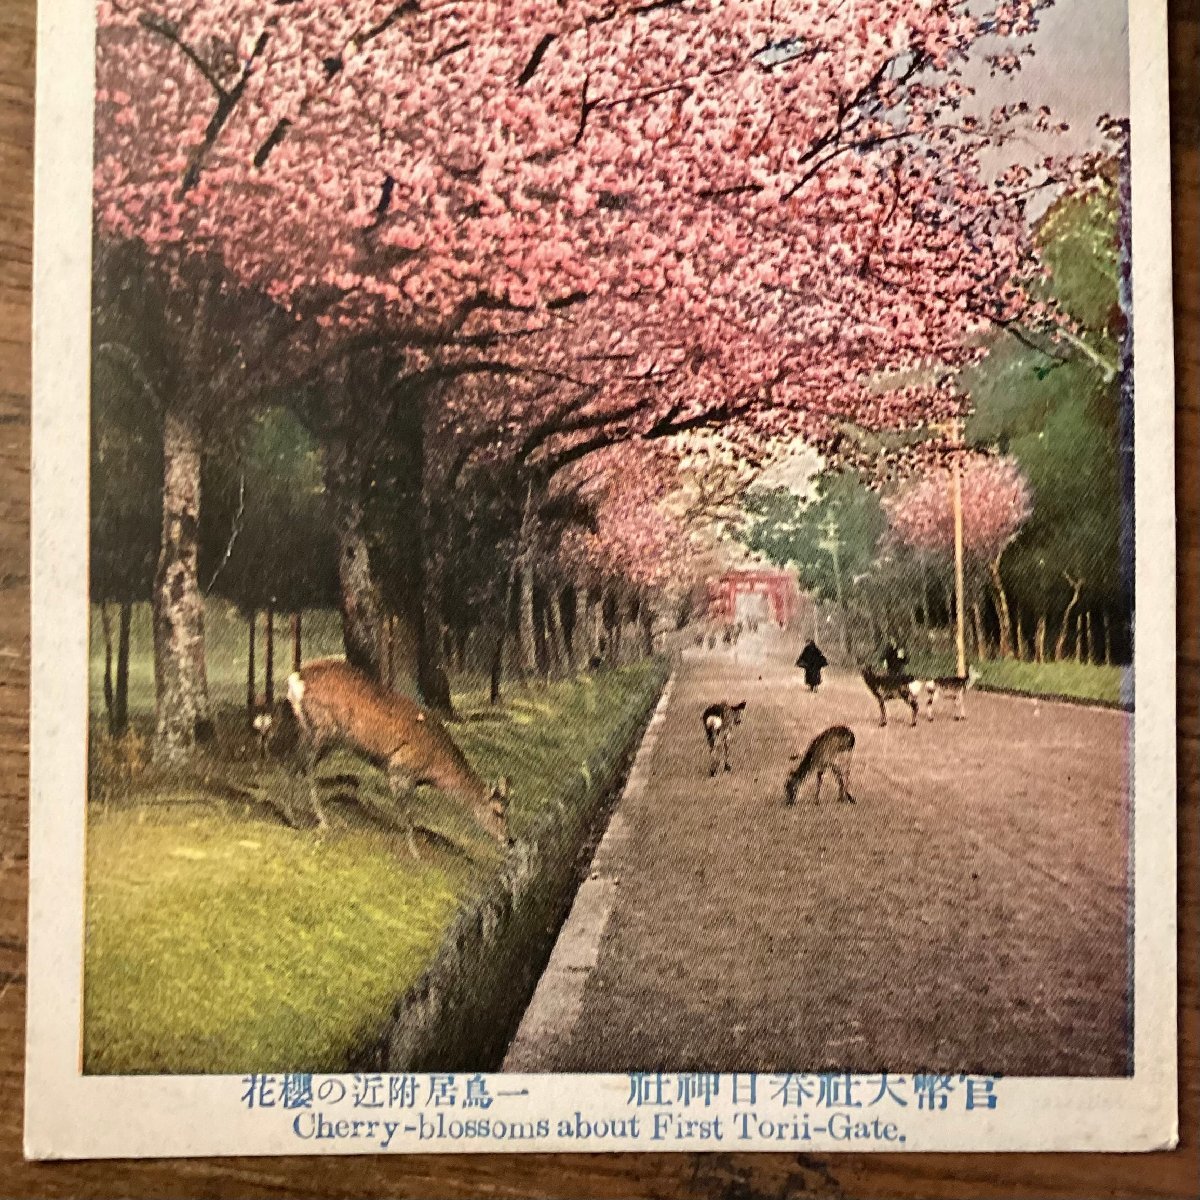 JJ-1735 # including carriage # Nara prefecture .. large company spring day large company one torii attaching close. Sakura flower god company Sakura average tree deer deer nature picture postcard picture printed matter /.FU.